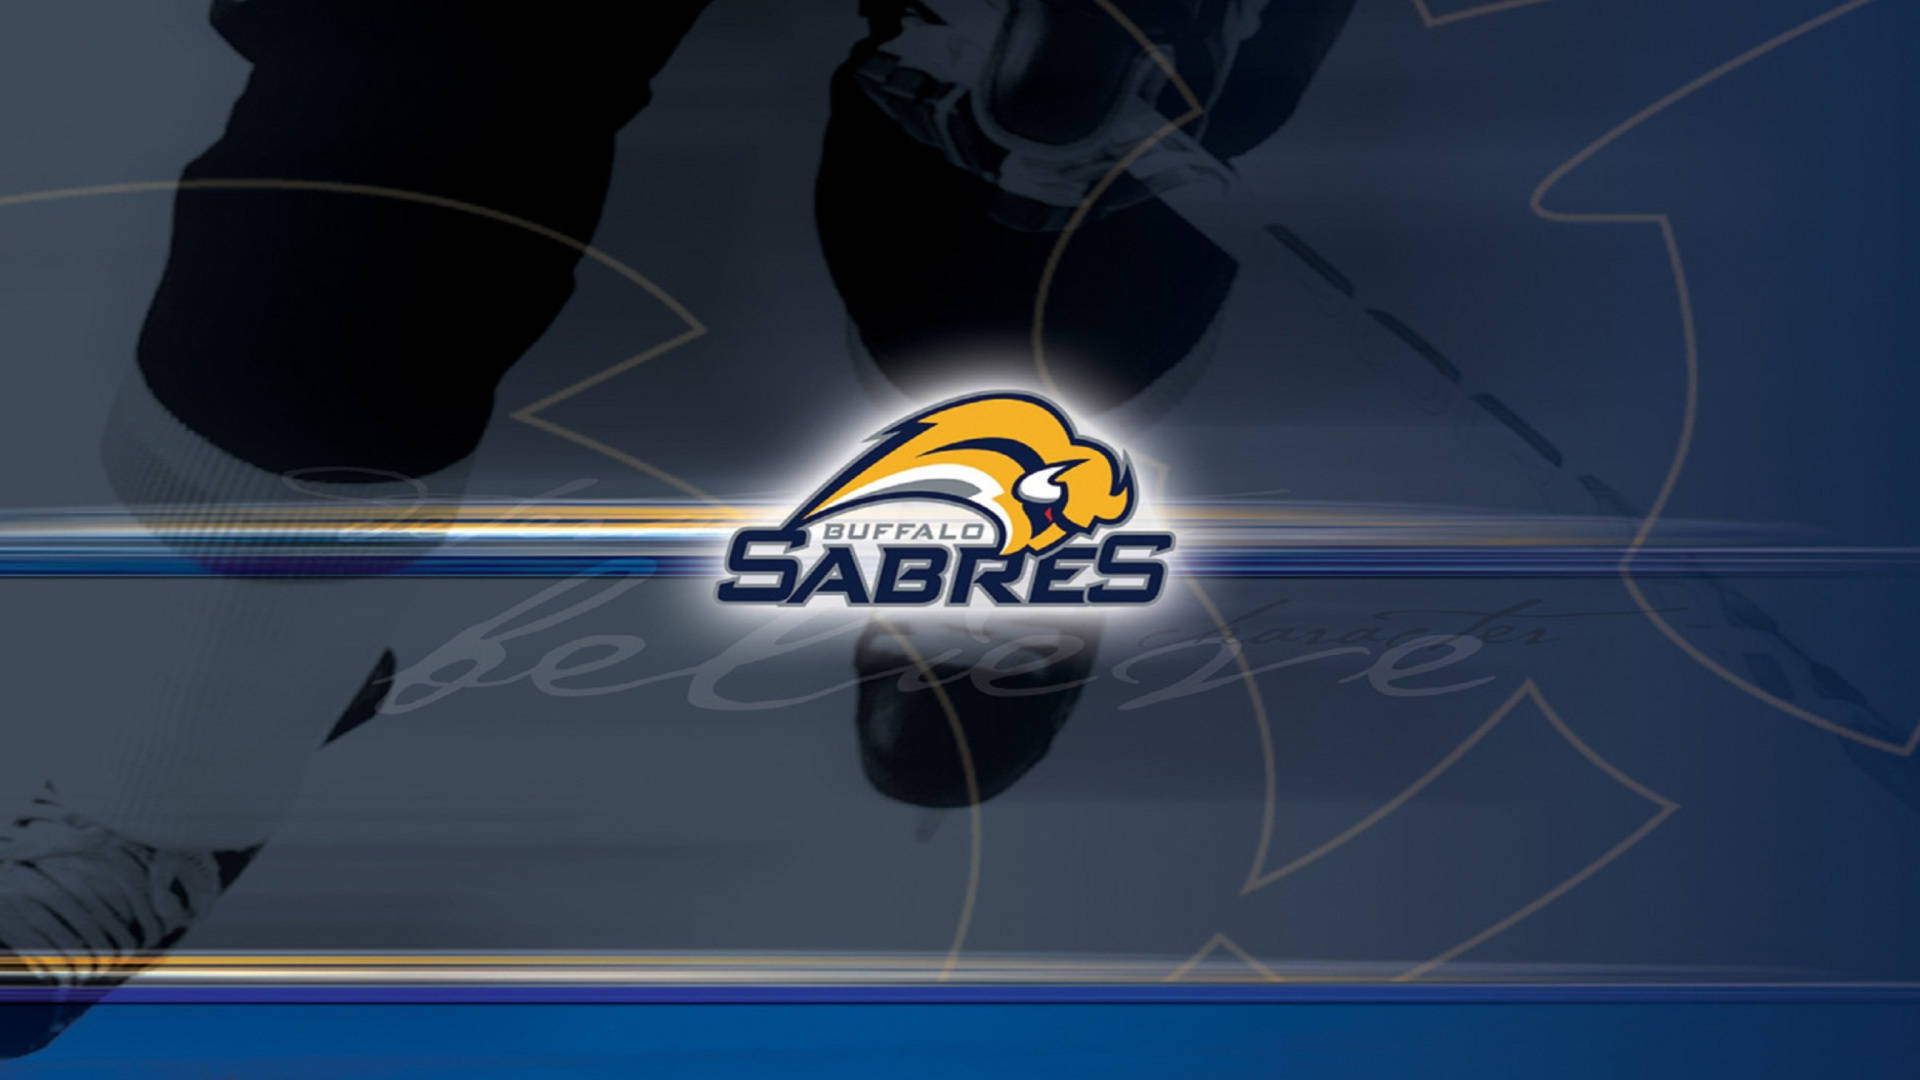 Buffalo Sabres Ice Rink Background